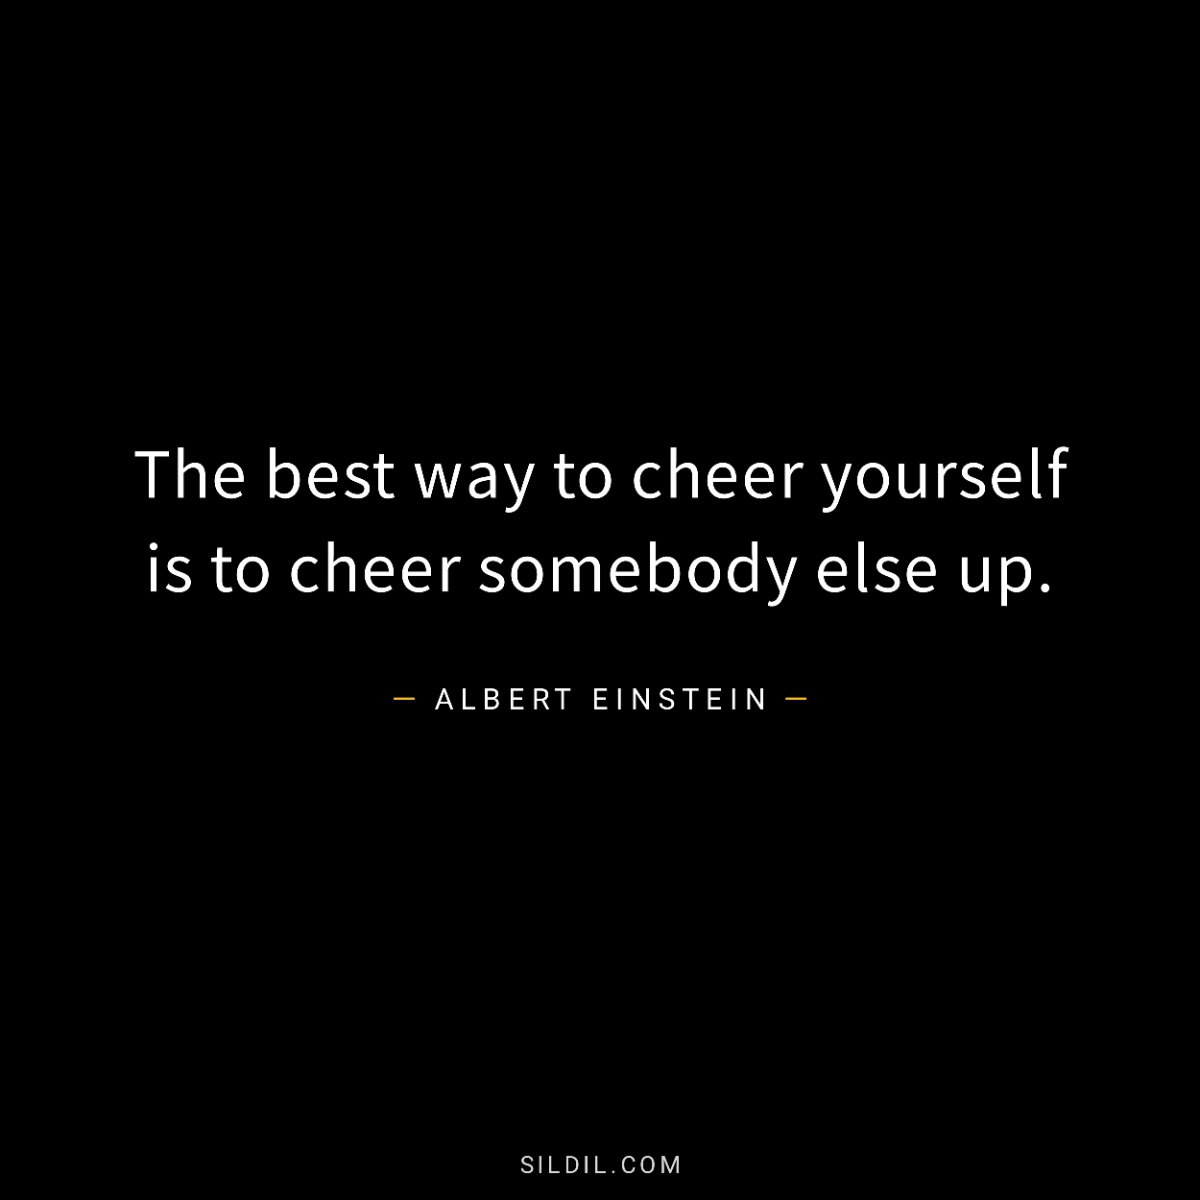 The best way to cheer yourself is to cheer somebody else up.